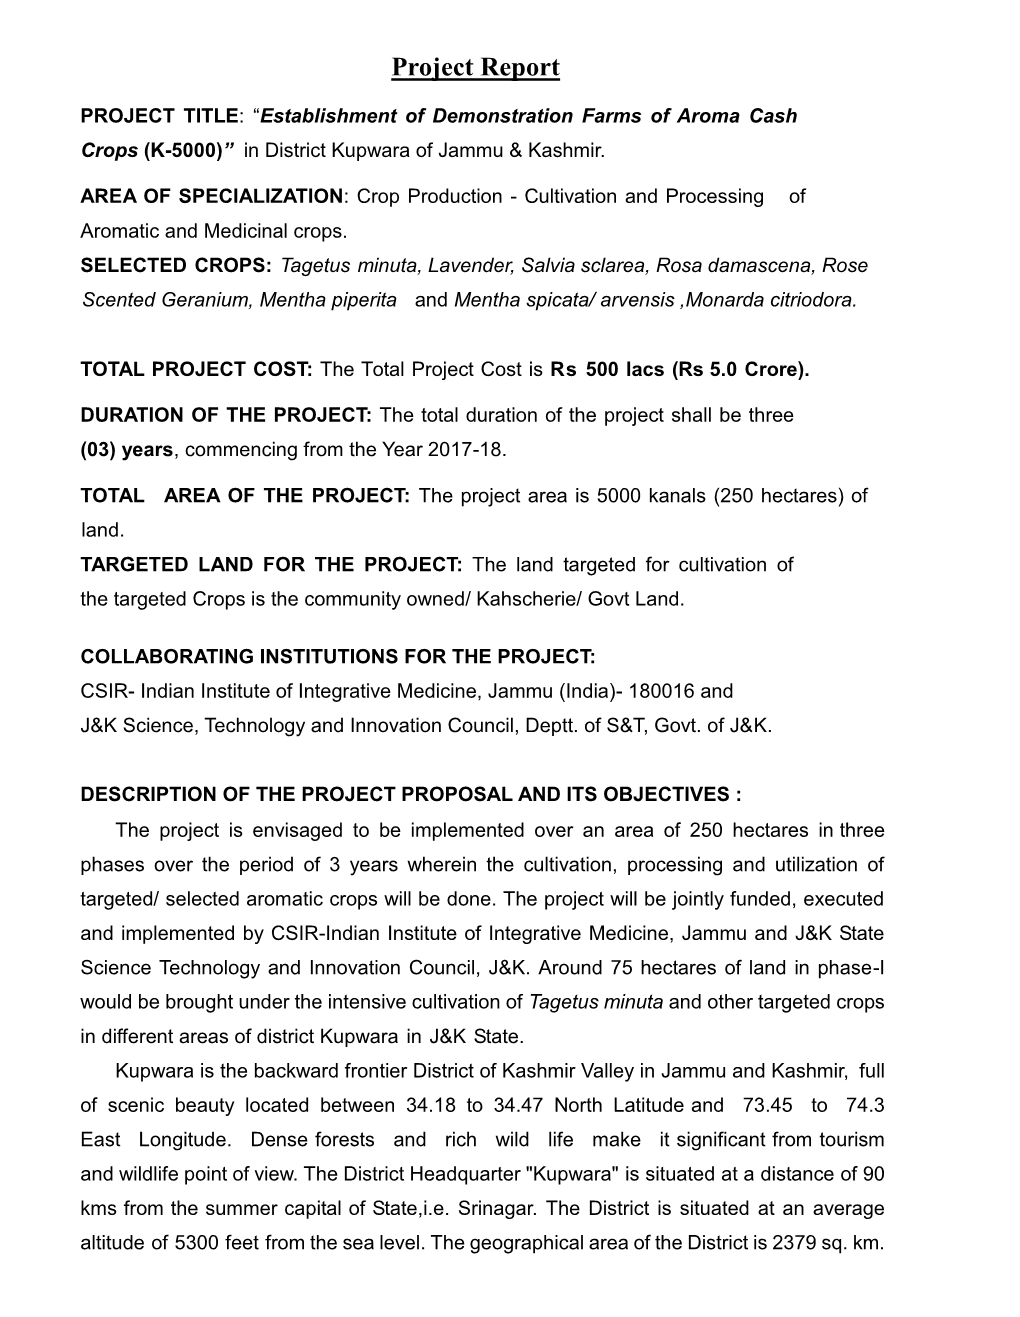 Description of the Project Proposal and Its Objectives